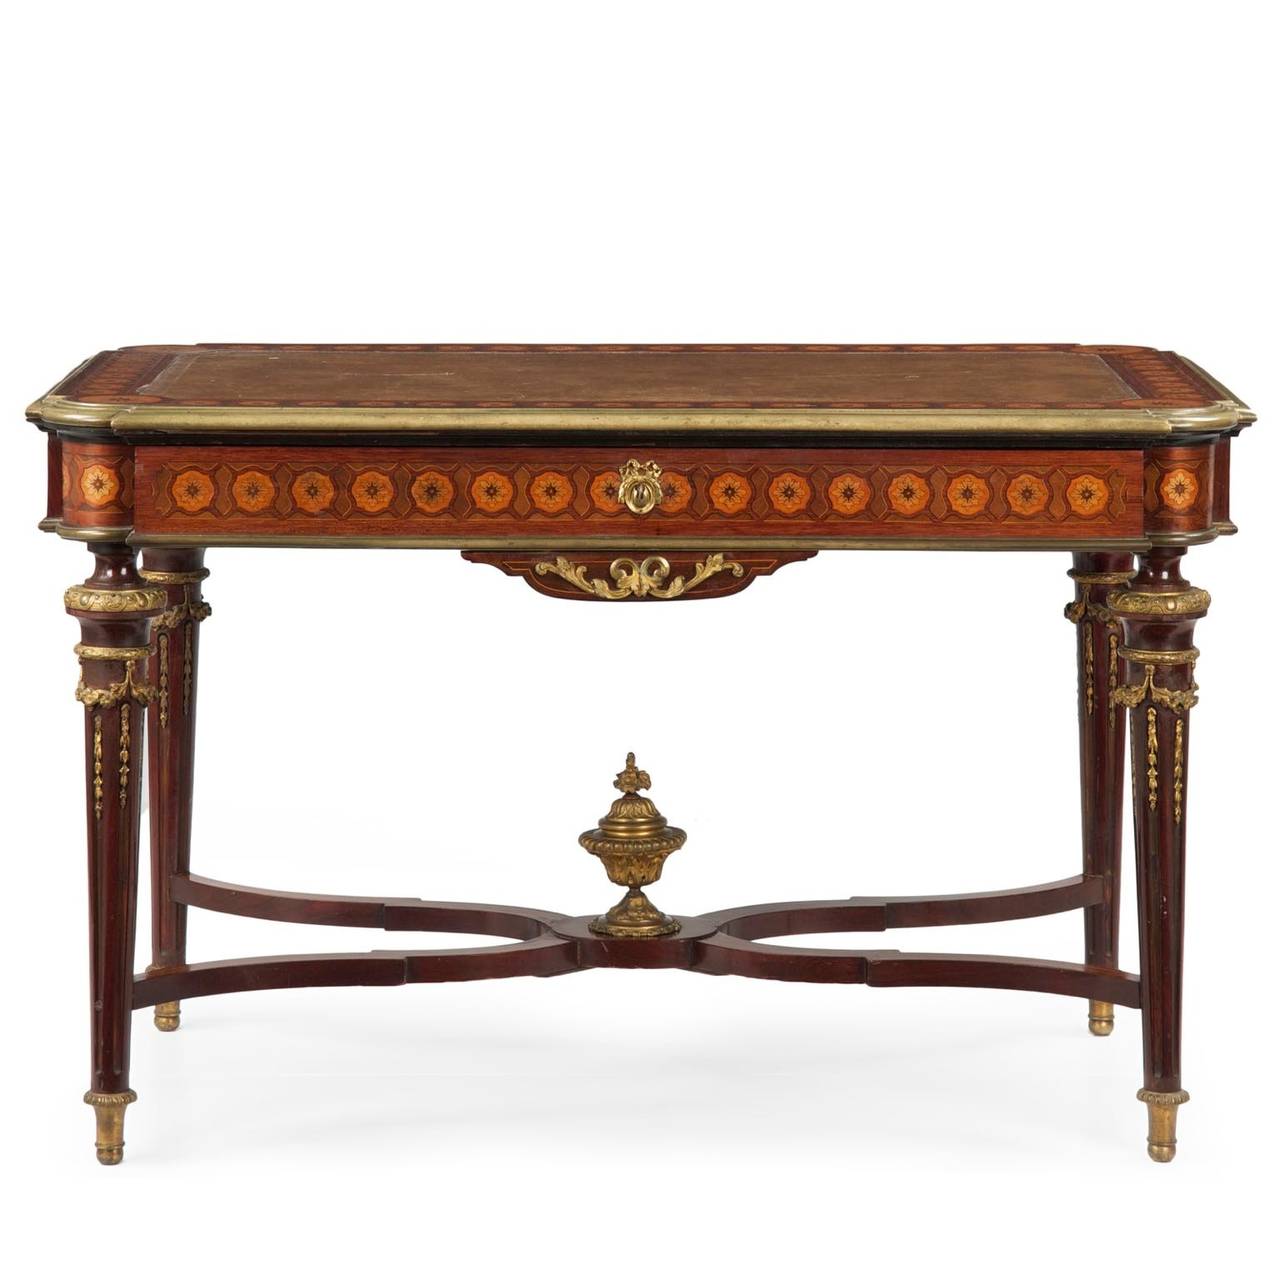 With some of the finest marquetry inlays, this exquisite bureau plat is a defining piece for the study. Exhibiting clean and delicate neoclassical lines, the form is light and airy with it's tapering legs that rise from brass capped feet into bold